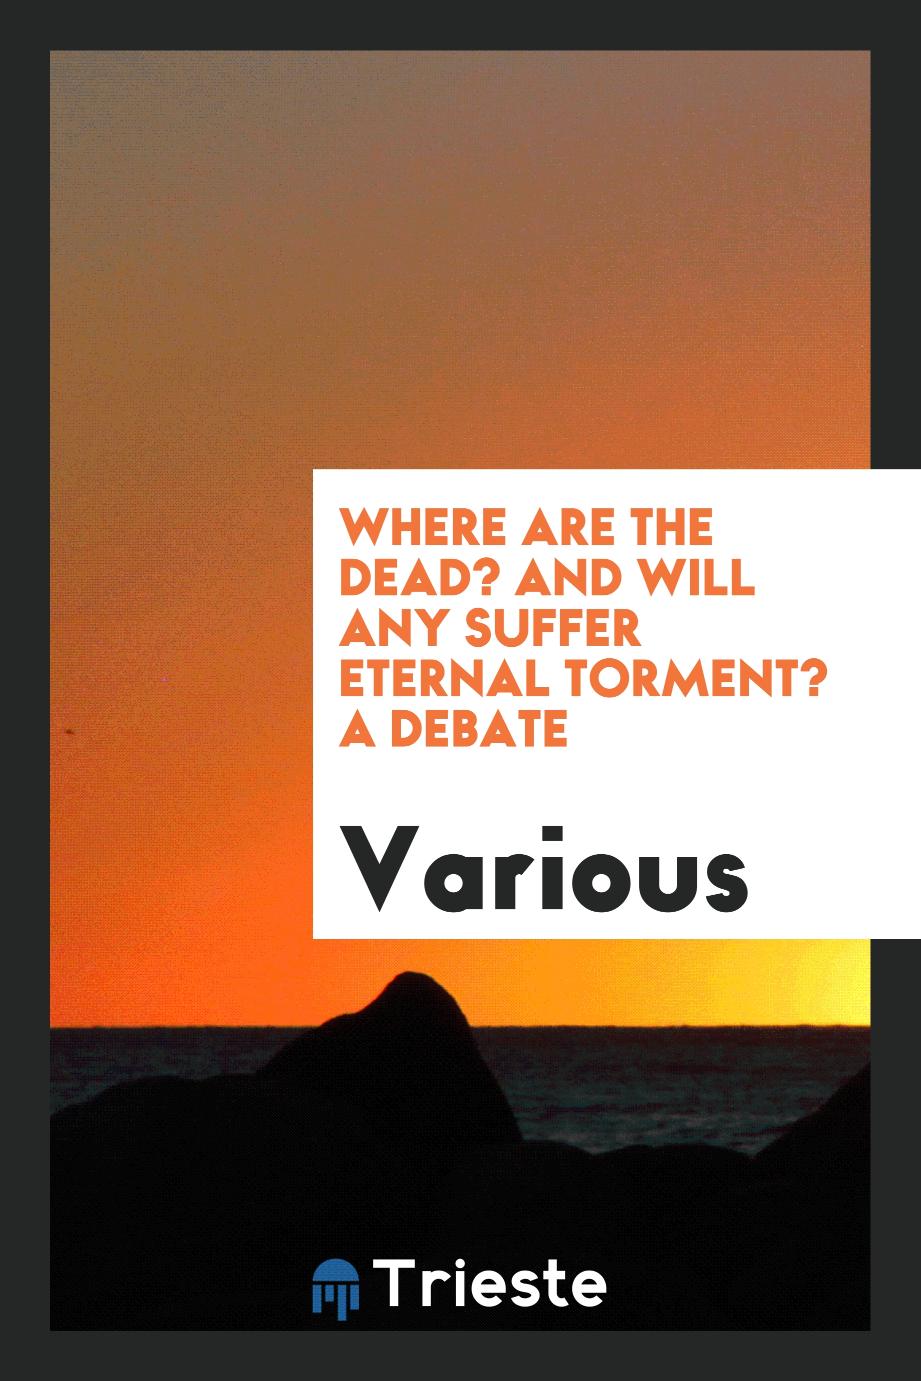 Where are the dead? And will any suffer eternal torment? A debate